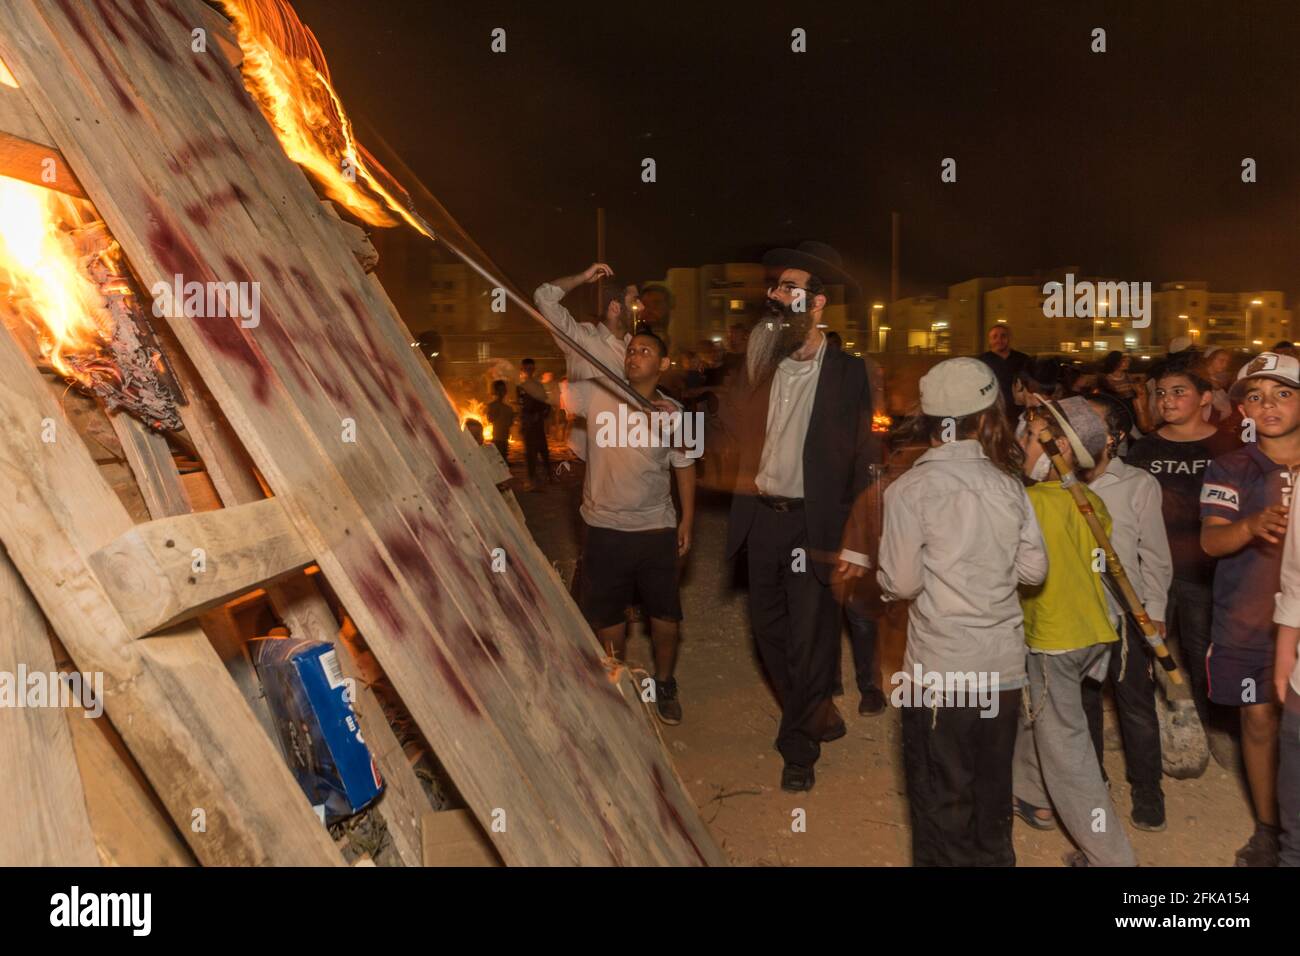 A Rabbi lights a large pyre during the Jewish Holiday of Lag Ba'Omer, which takes place every  18th of Hebrew month Iyar. It is customary during this holiday to make fires. This year, due to fire hazard warning, all fires were concentrated to few sites, hence the large number of pyres. Stock Photo